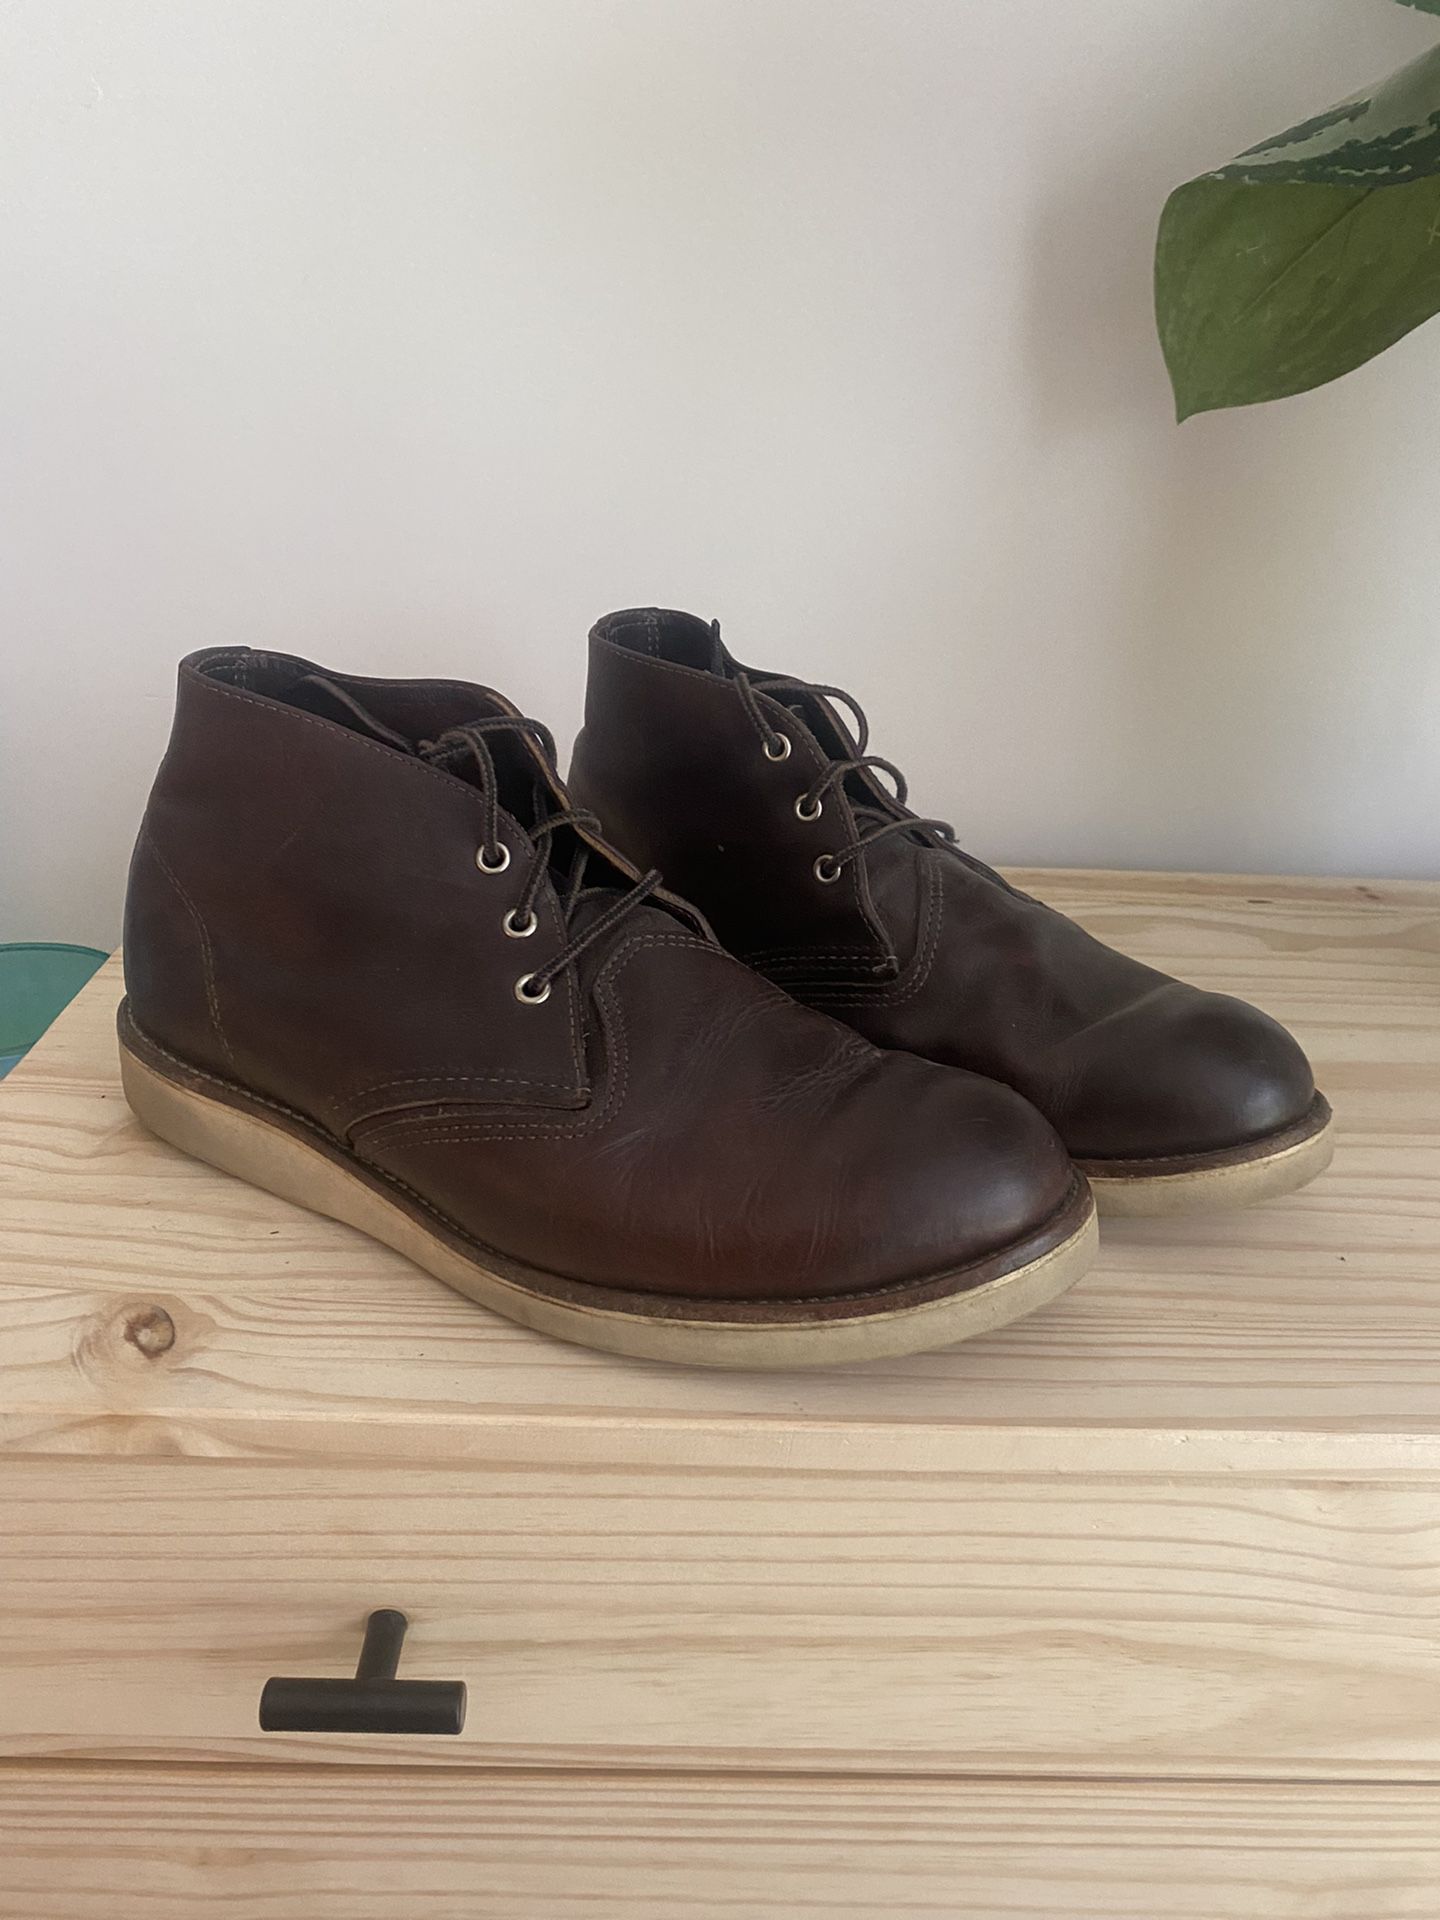 Red Wing Heritage chukka Boot Size 10.5 E2